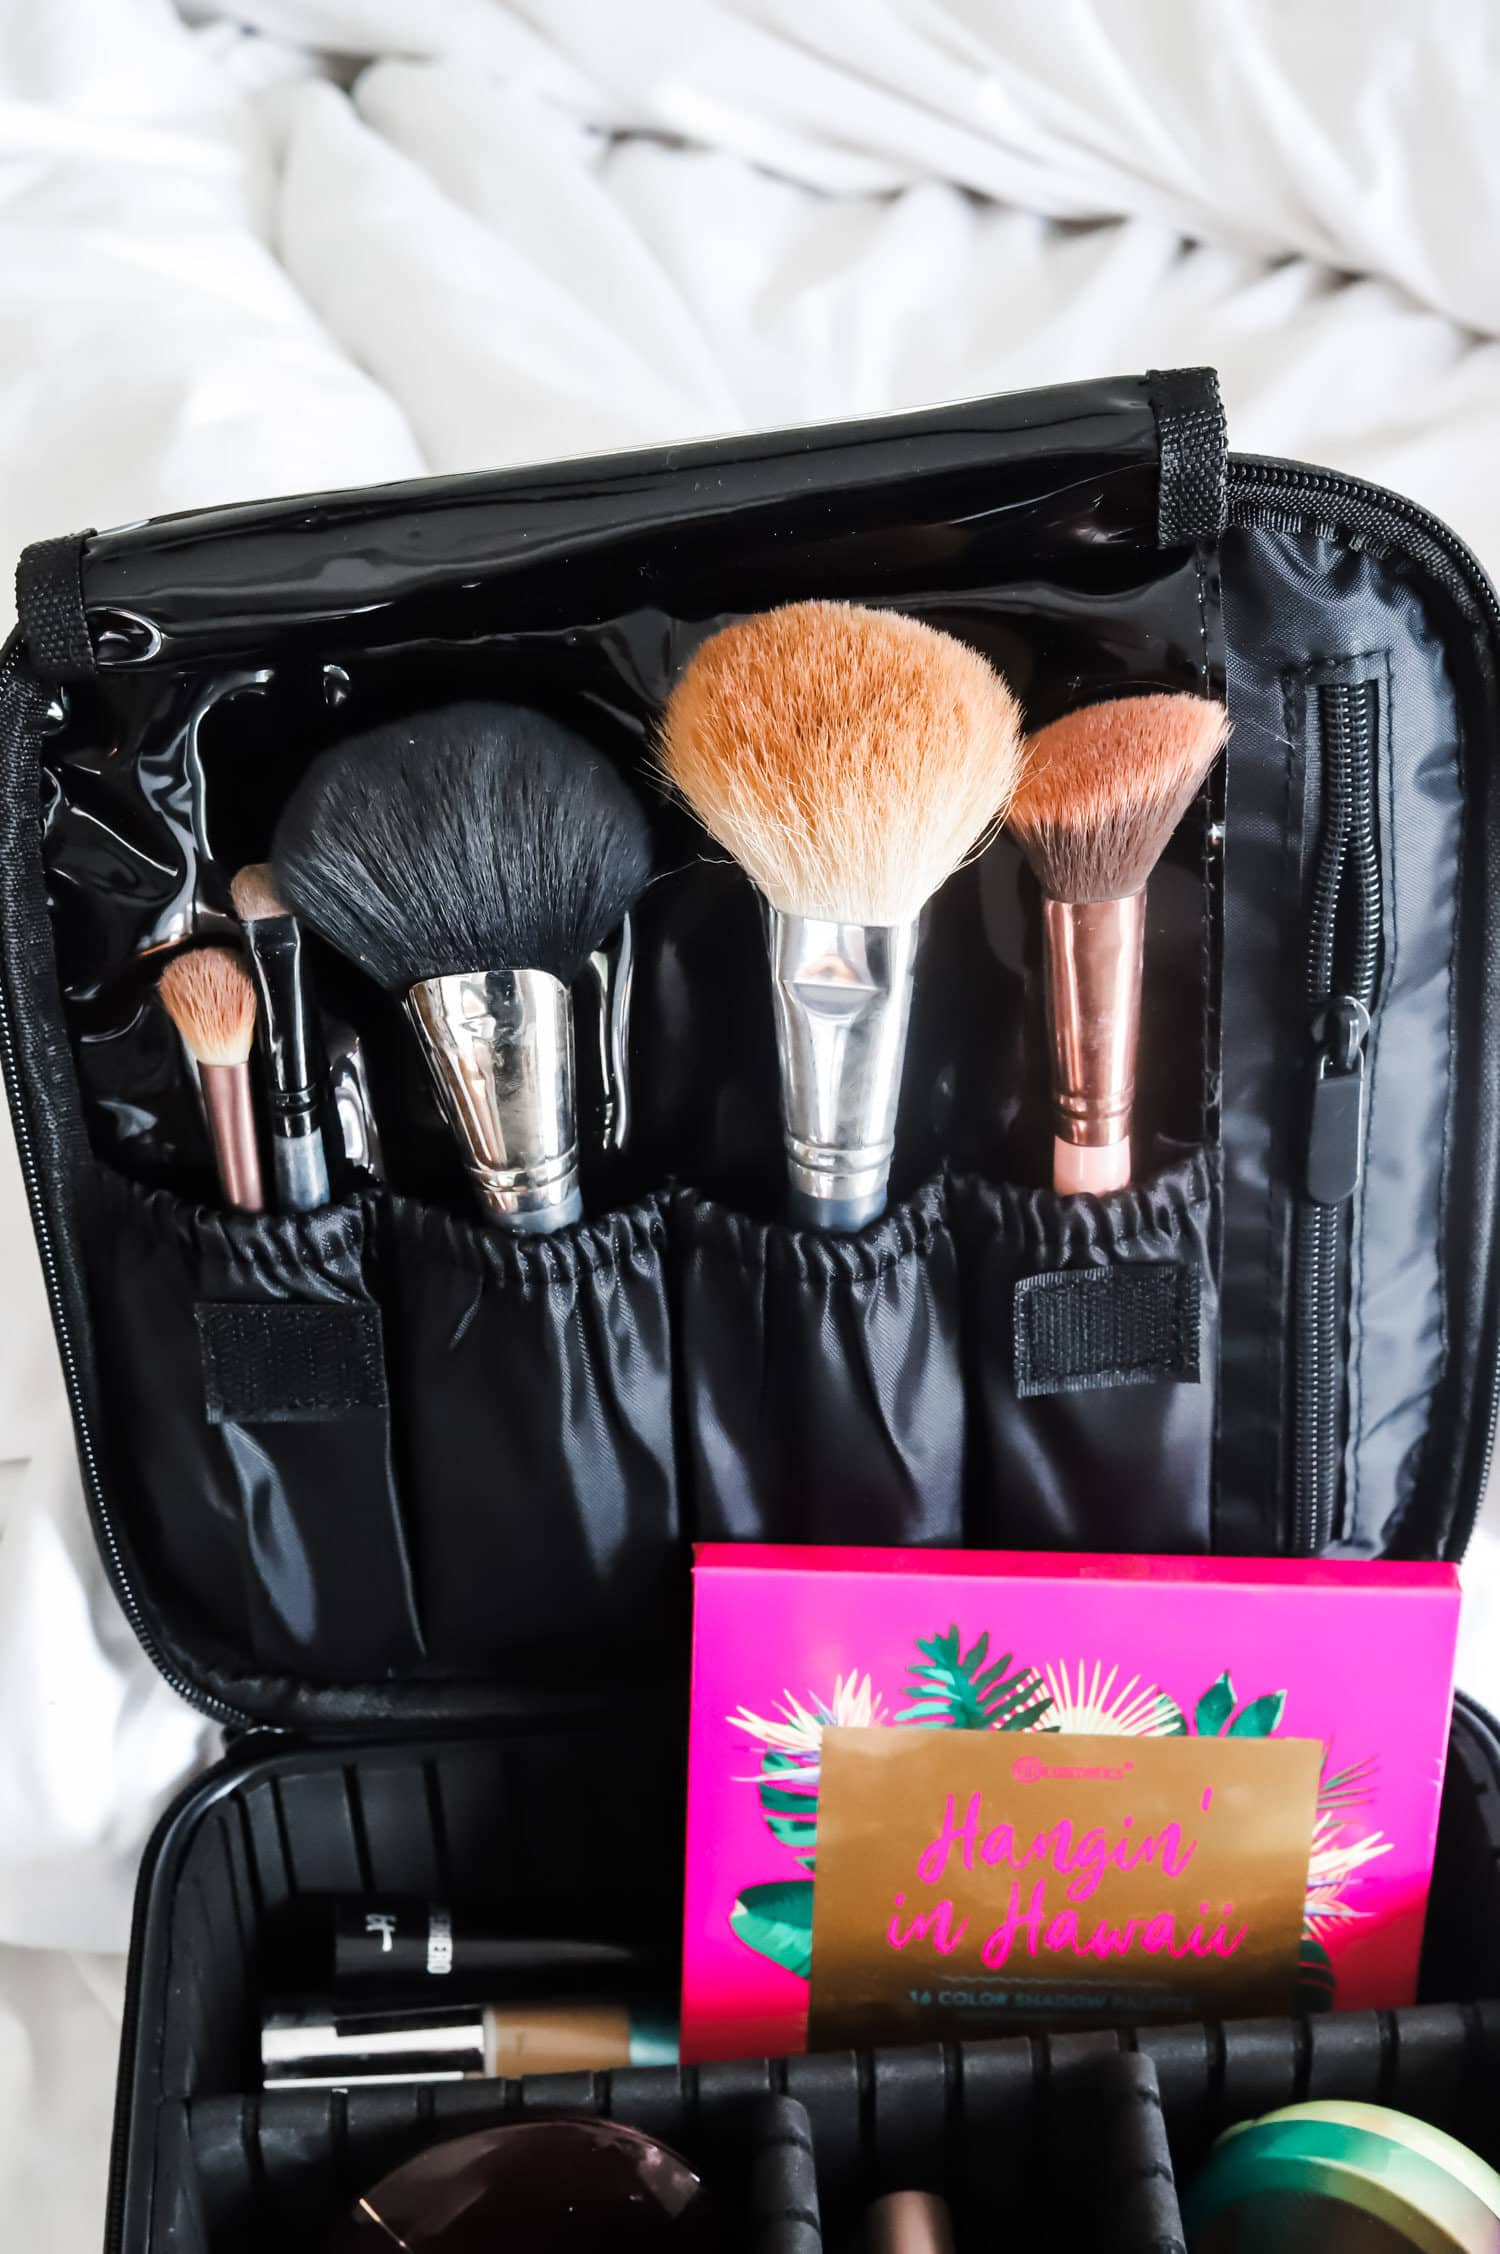 What to Buy On Amazon: the top beauty and fashion bestsellers from Amazon Prime - including the best zip-up travel beauty and makeup organizer under $20! | Orlando, Florida beauty and fashion blogger Ashley Brooke Nicholas